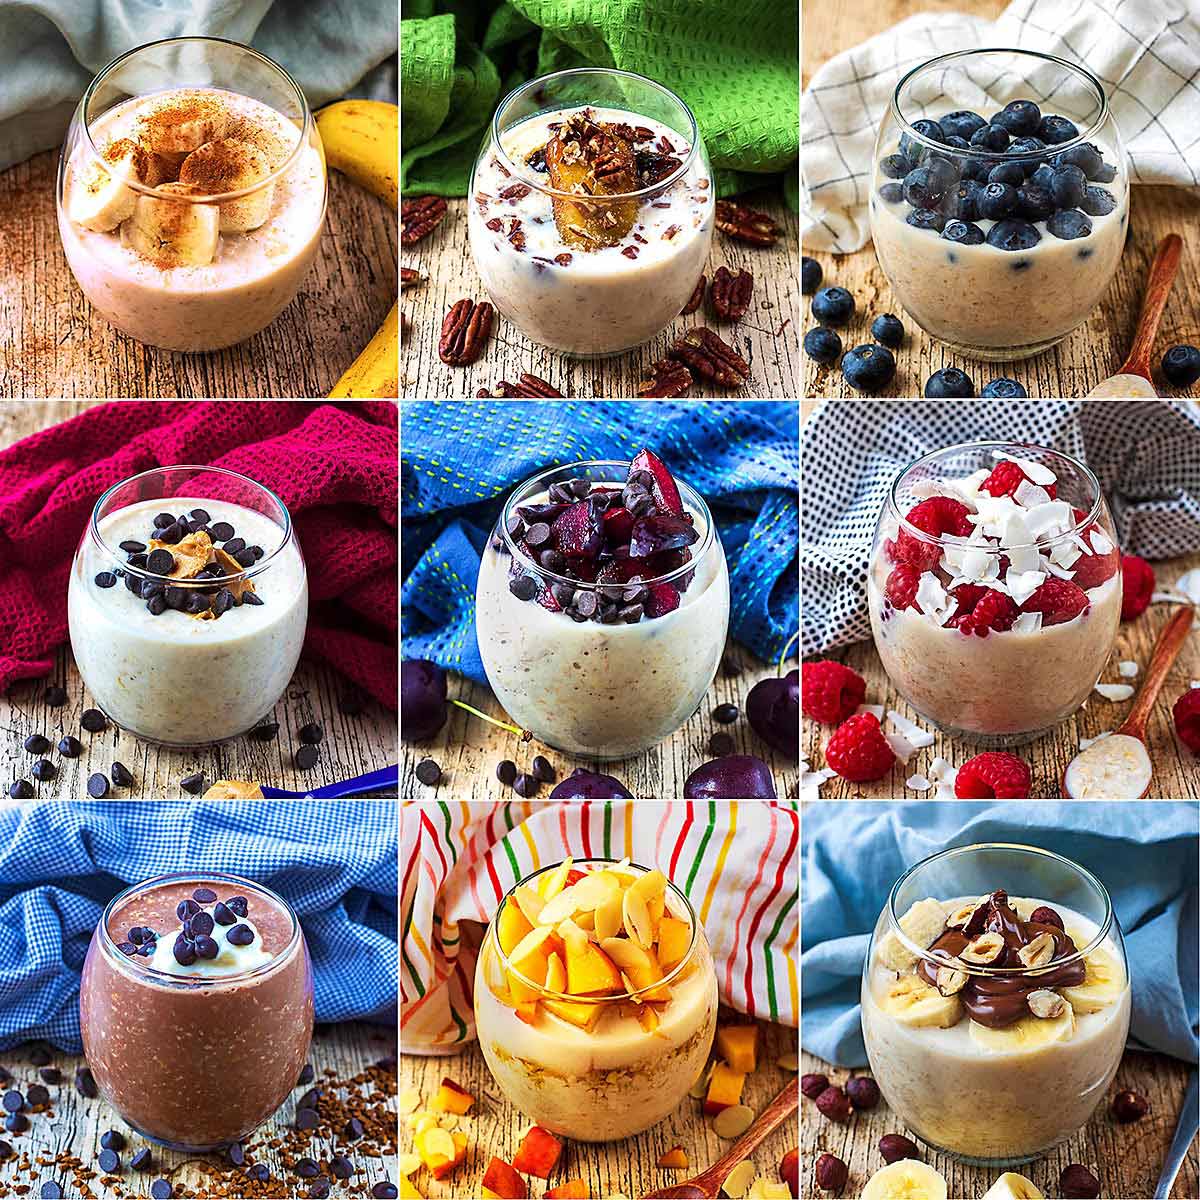 https://hungryhealthyhappy.com/wp-content/uploads/2021/01/overnight-oats-featured-c.jpg